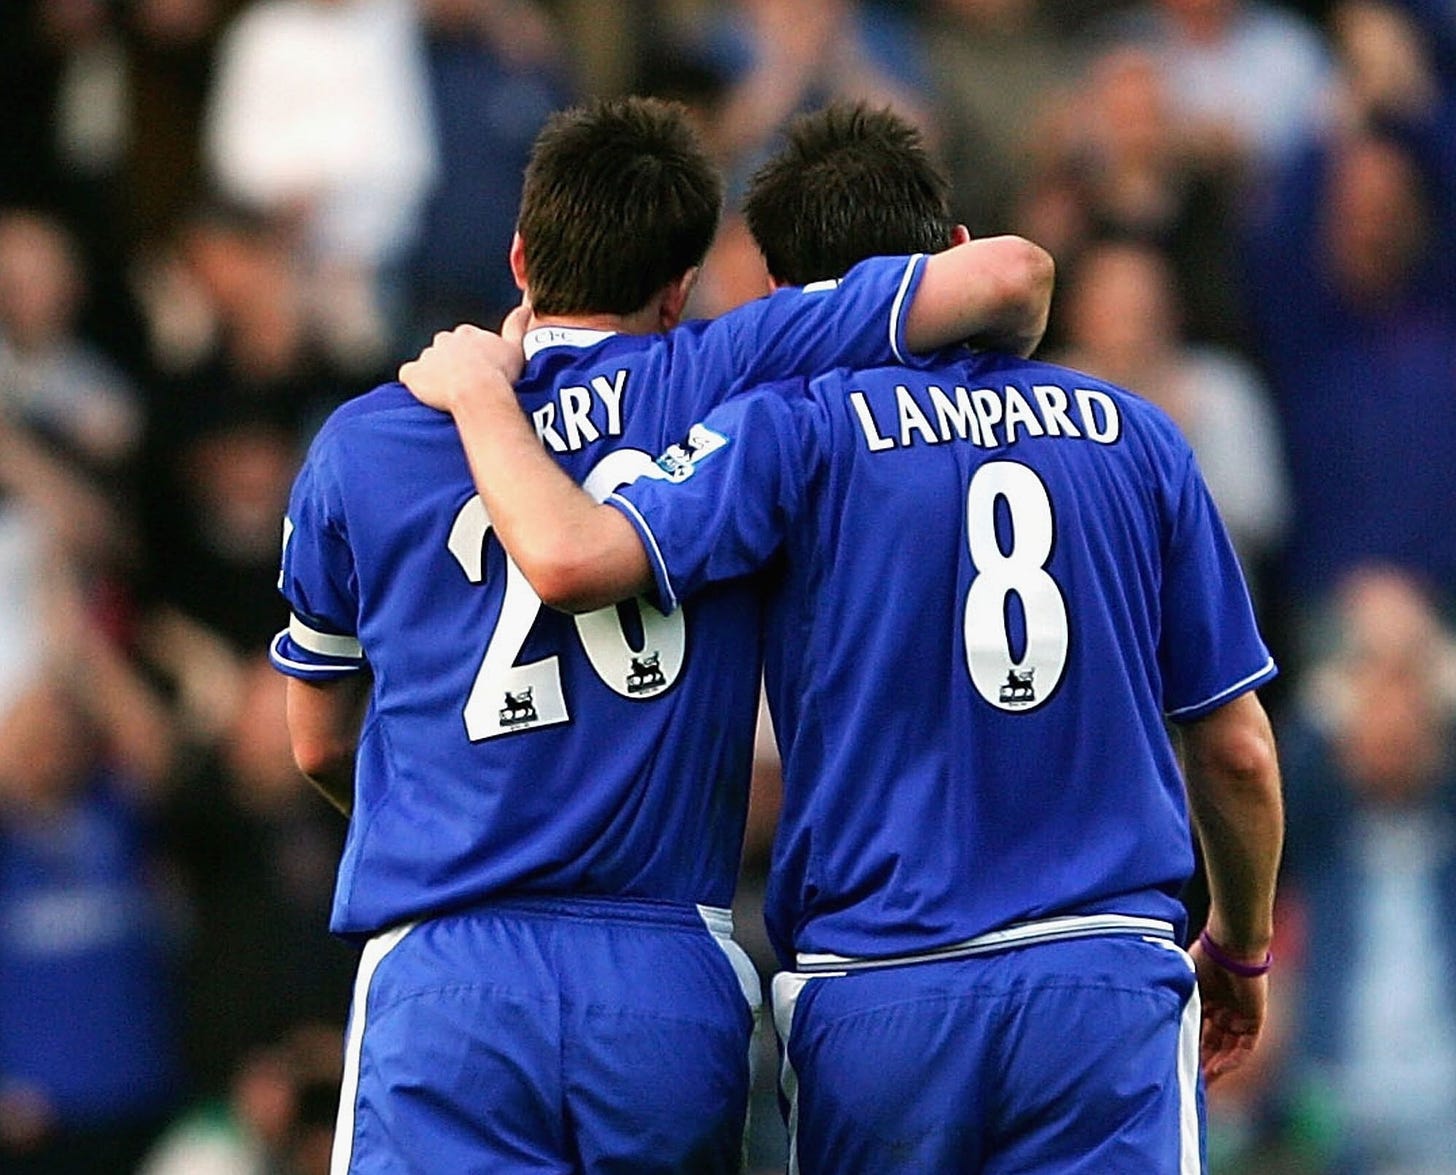 Chelsea FC on X: "Frank Lampard: 'What a pleasure to play with the greatest  defender in the Premier League's history.' https://t.co/2TjQgC3HBZ" / X